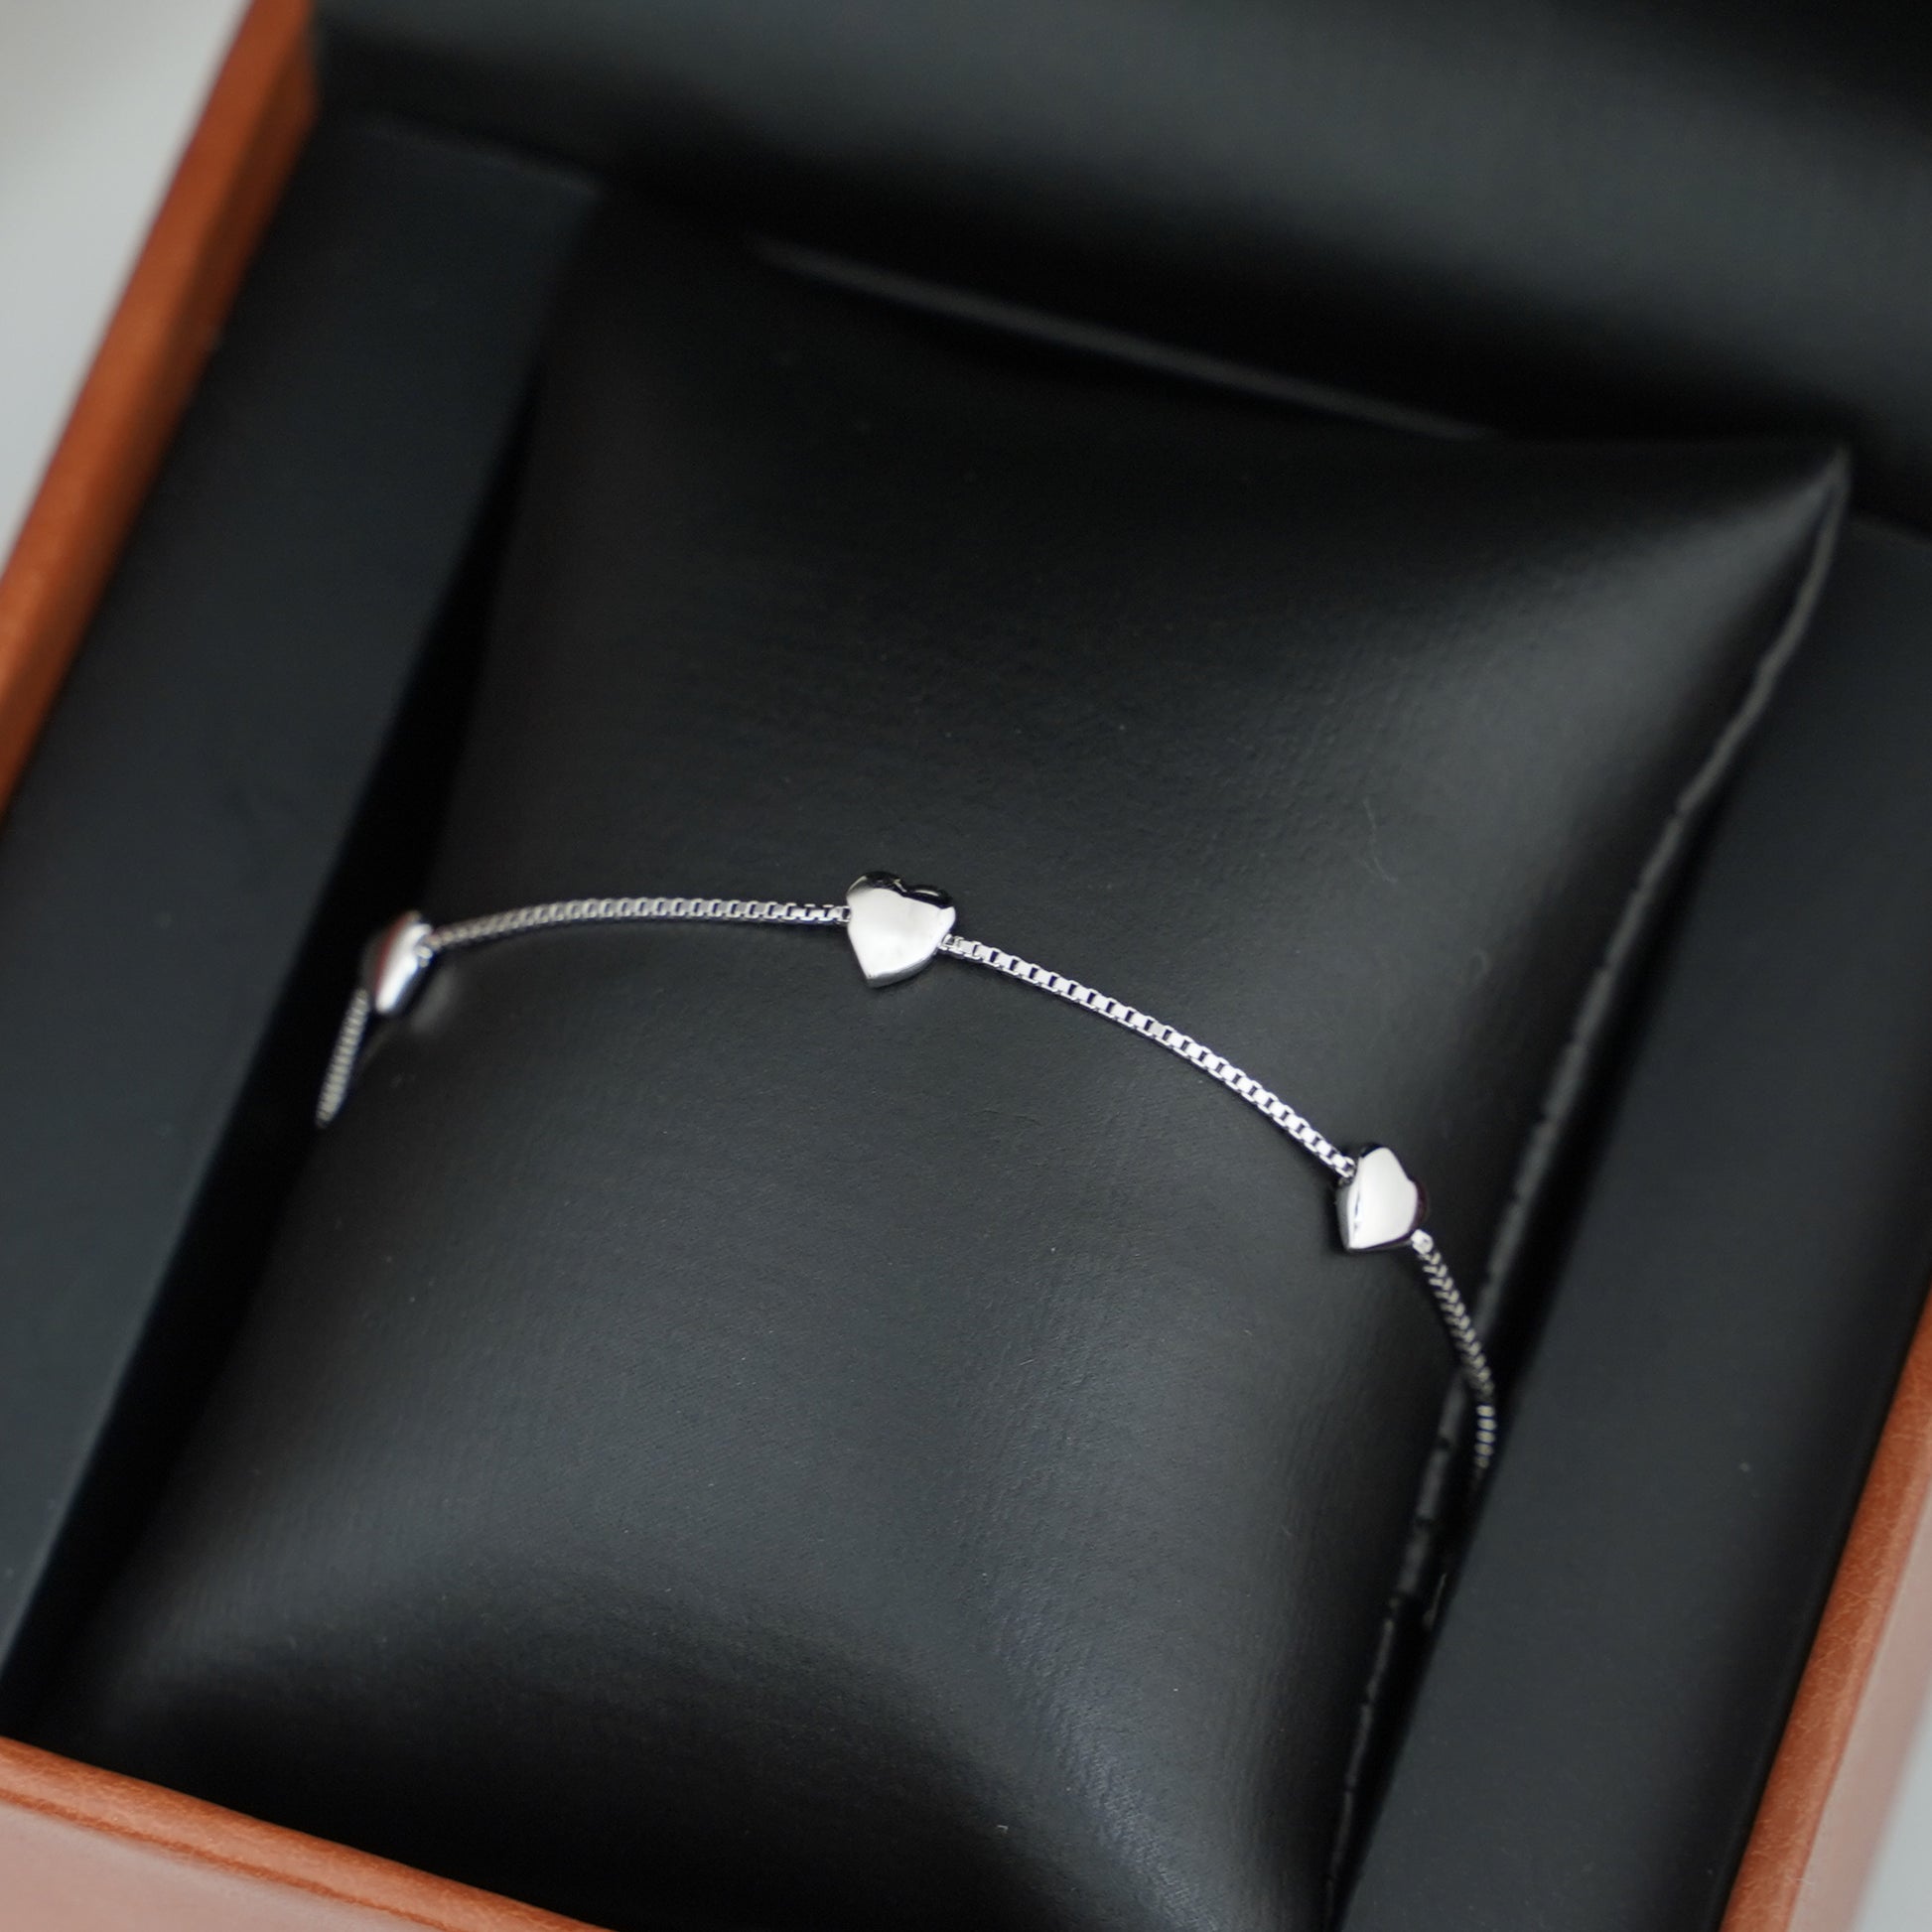 Love Hearts Bracelet in Rhodium Plated Sterling Silver with Box Chain - sugarkittenlondon